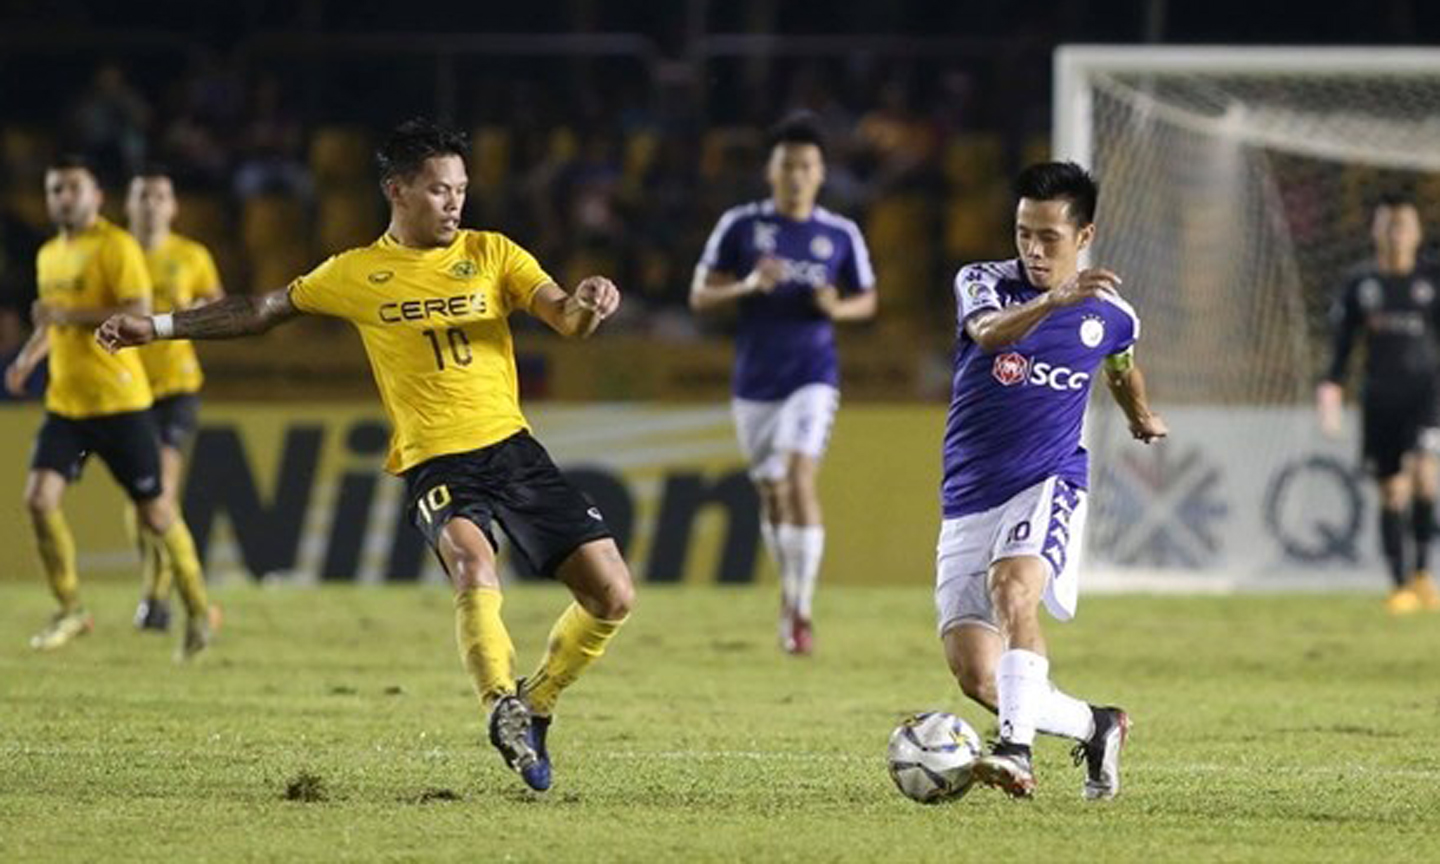  Hanoi FC captain Nguyen Văn Quyet (right) runs the ball pass Ceres Negros midfielder OJ Porteria during their first leg match of the AFC Cup ASEAN Zonal semi-finals last Tuesday in Bacalod. They will meet each other today in the second leg match at Hang Day Stadium in Hanoi. (Photo: kenh14)